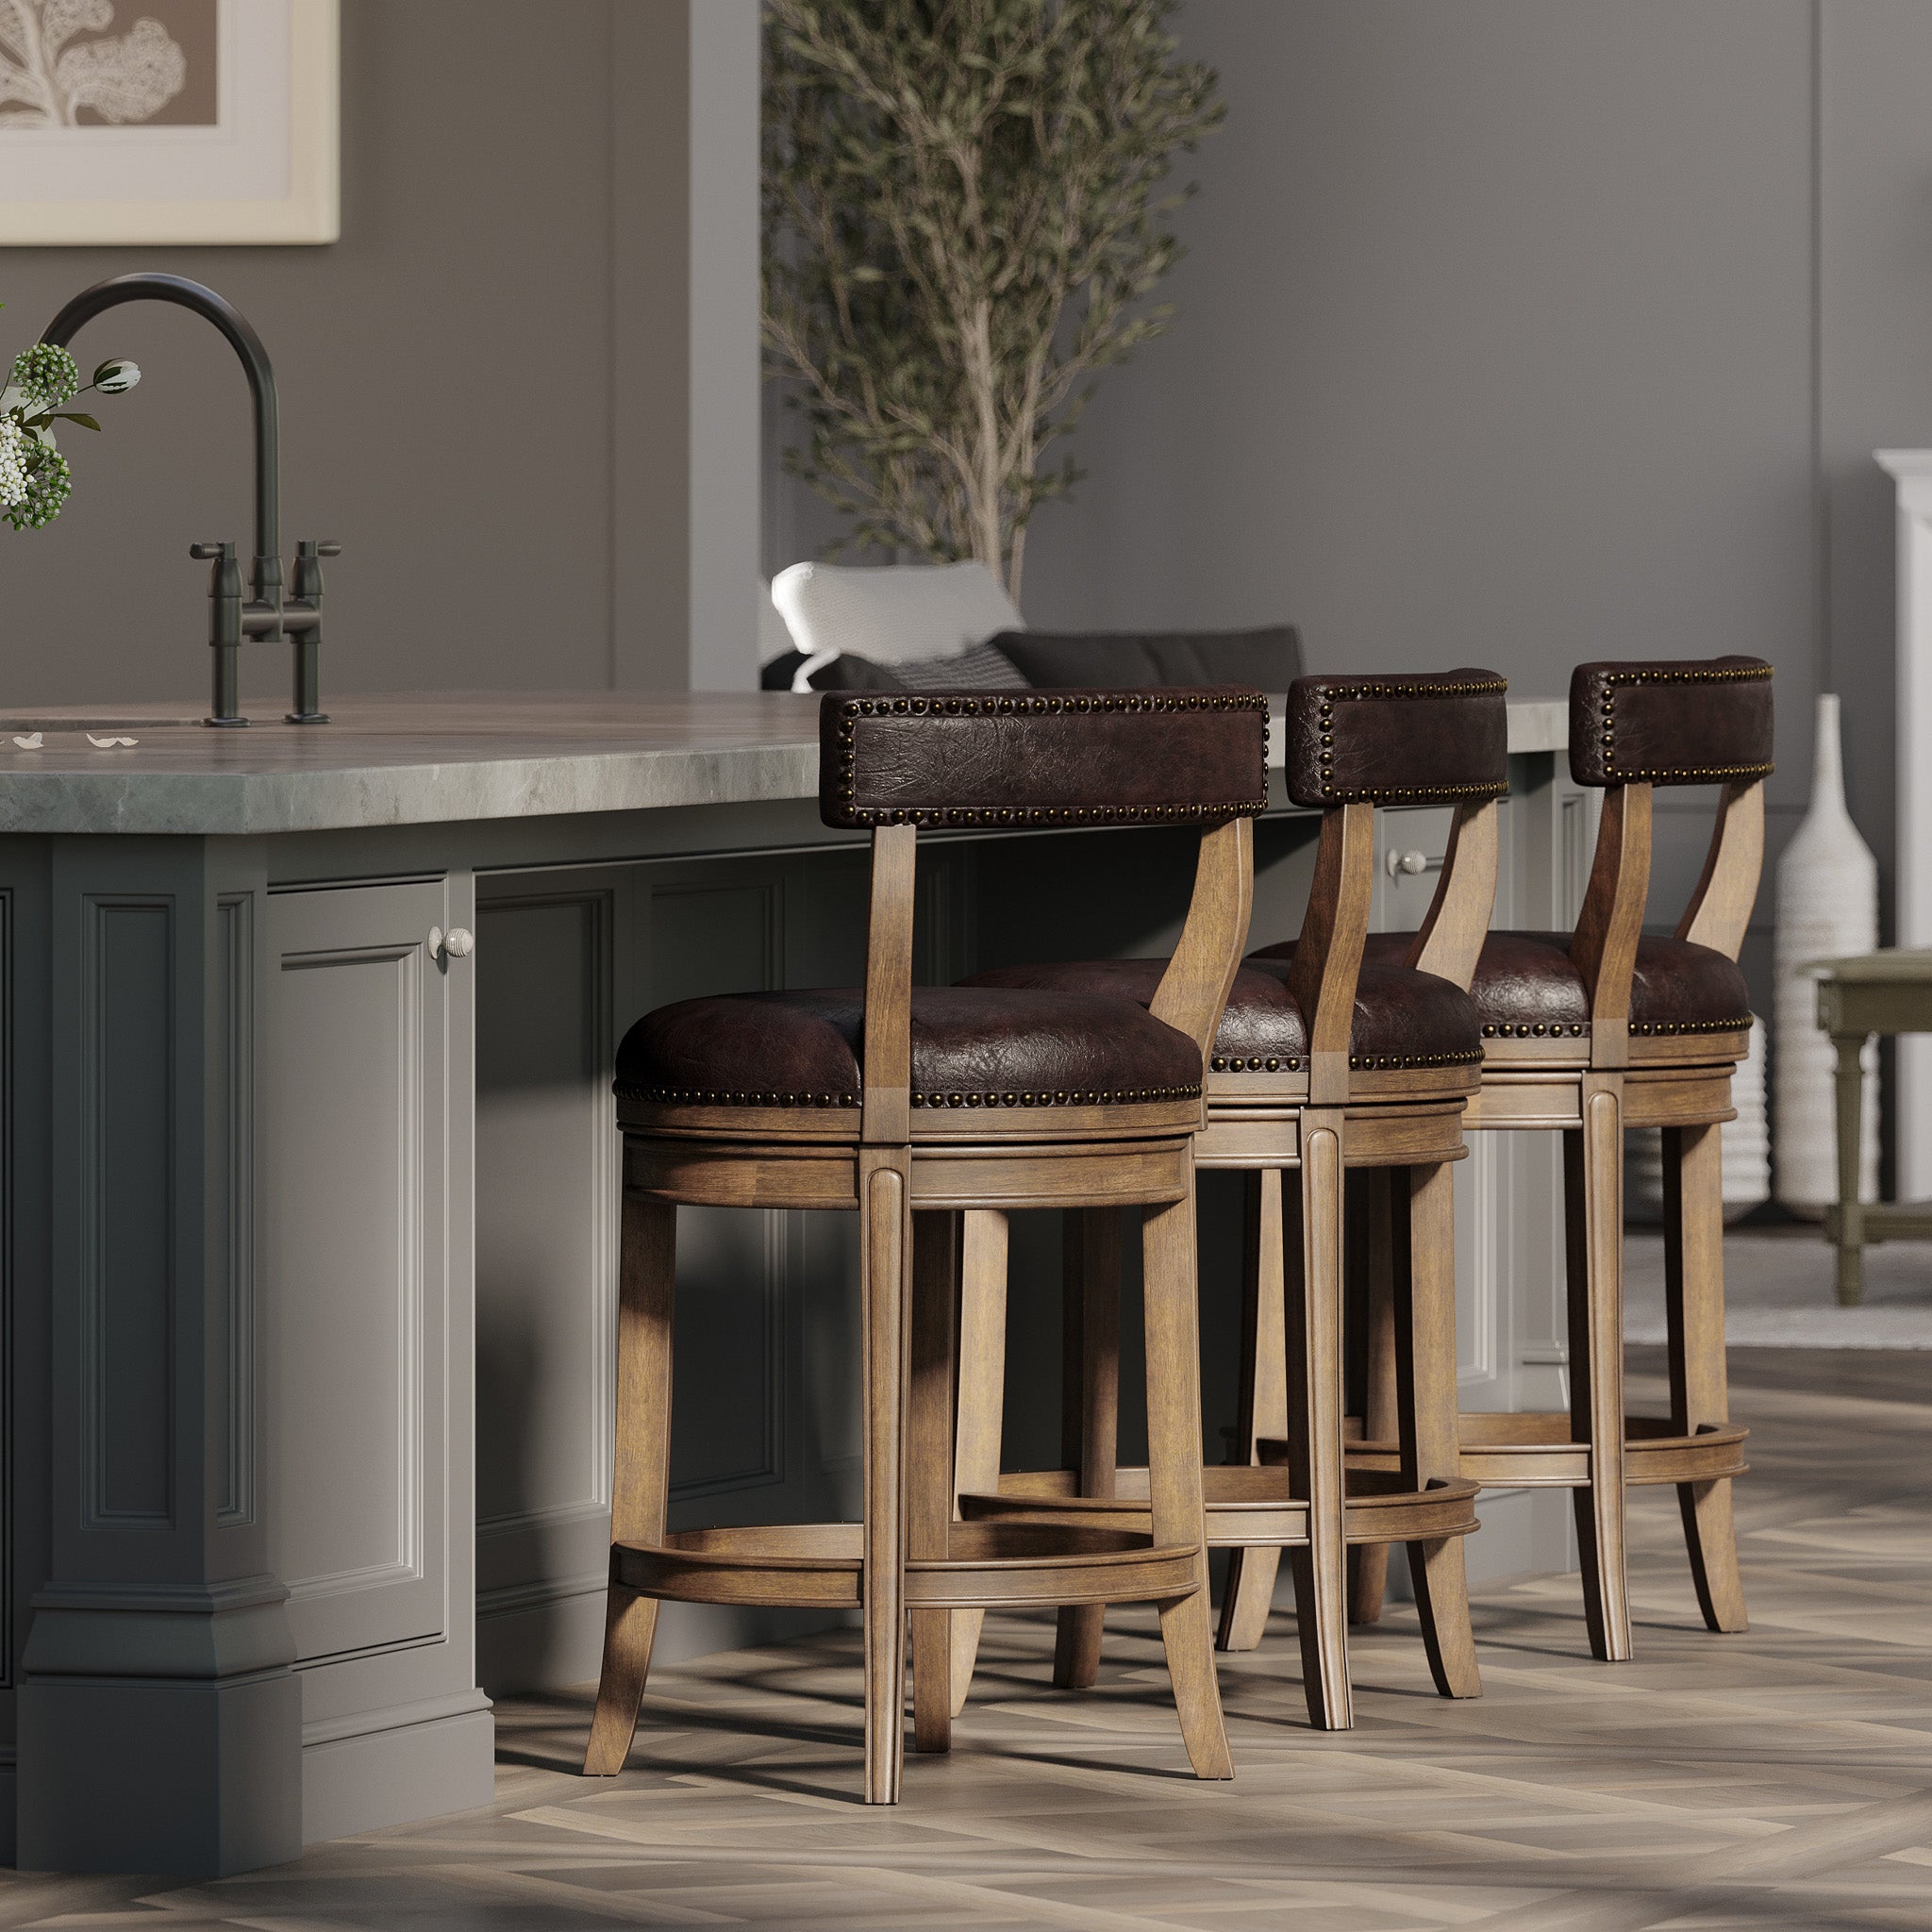 Alexander Counter Stool in Walnut Finish with Marksman Saddle Vegan Leather in Stools by Maven Lane